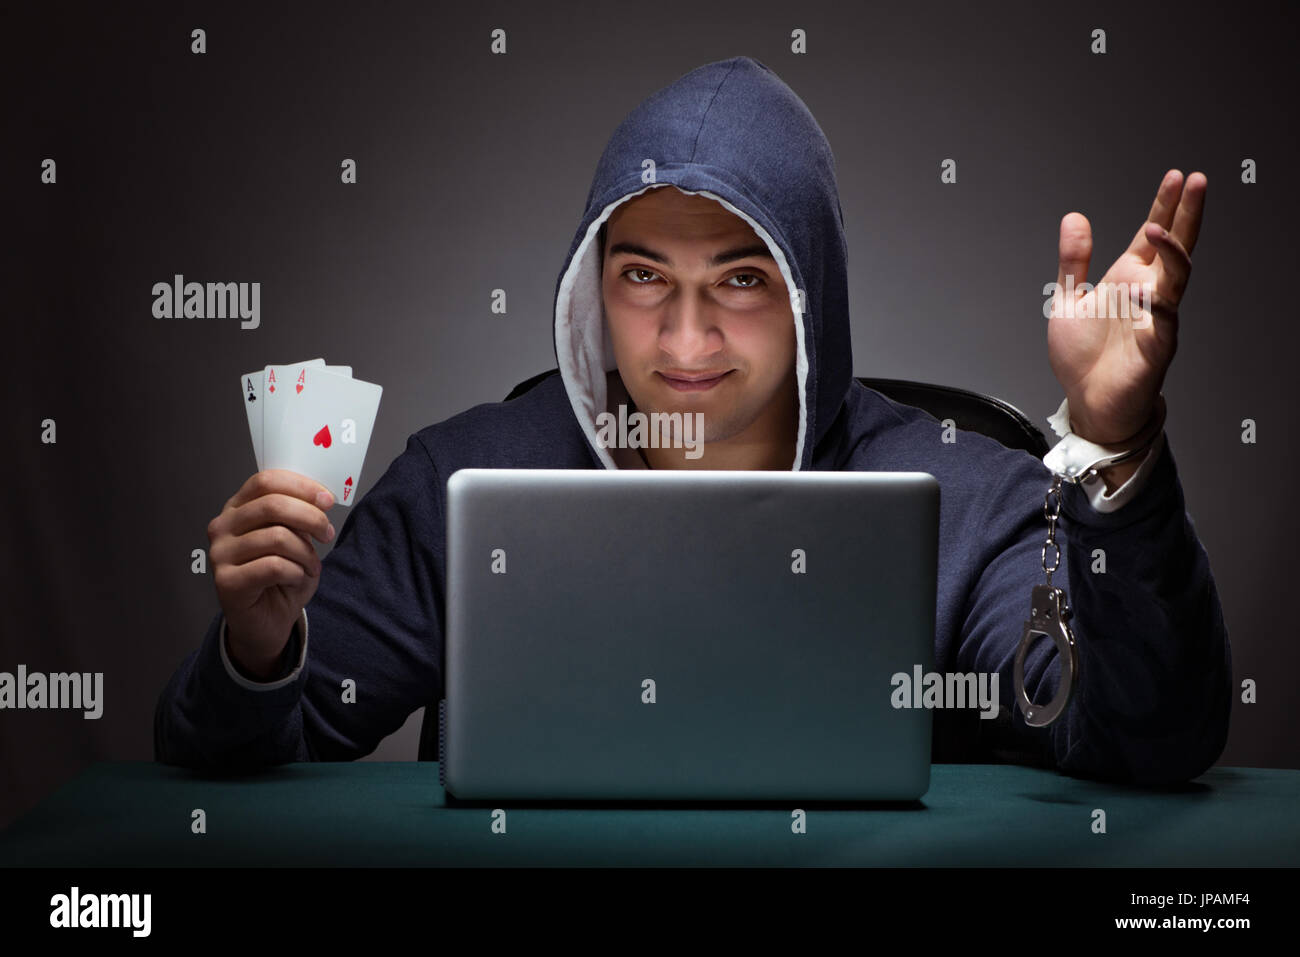 Young man in handcuffs wearing a hoodie sitting in front of a laptop computer gambling Stock Photo